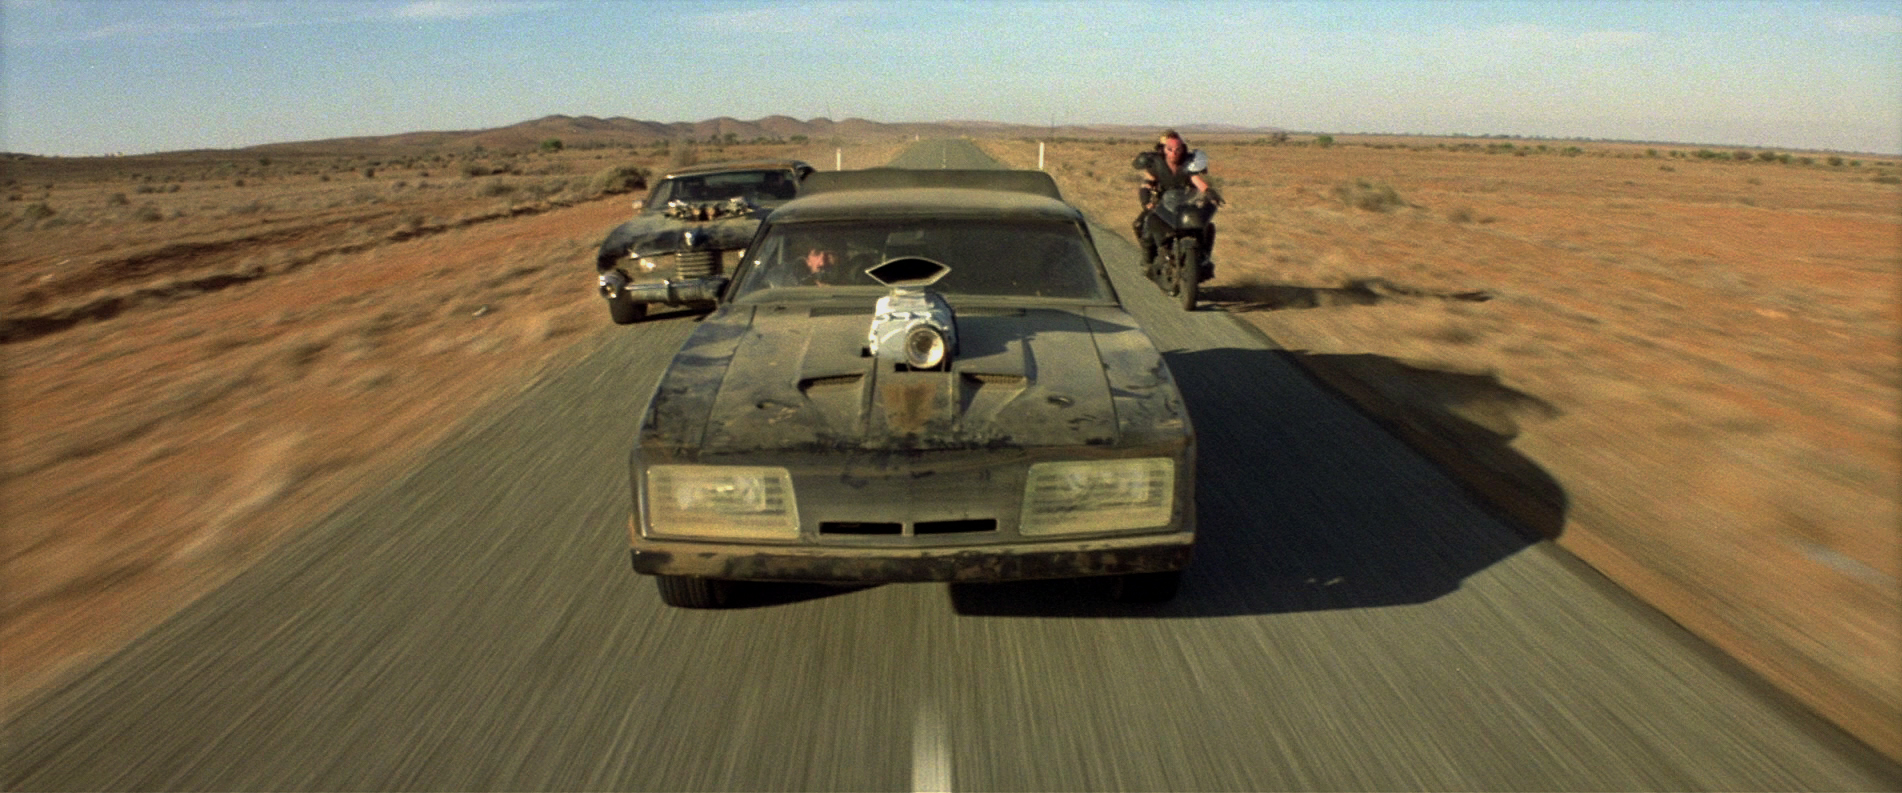 Mad Max The Road Warrior Film Review Top Sci Fi Movies